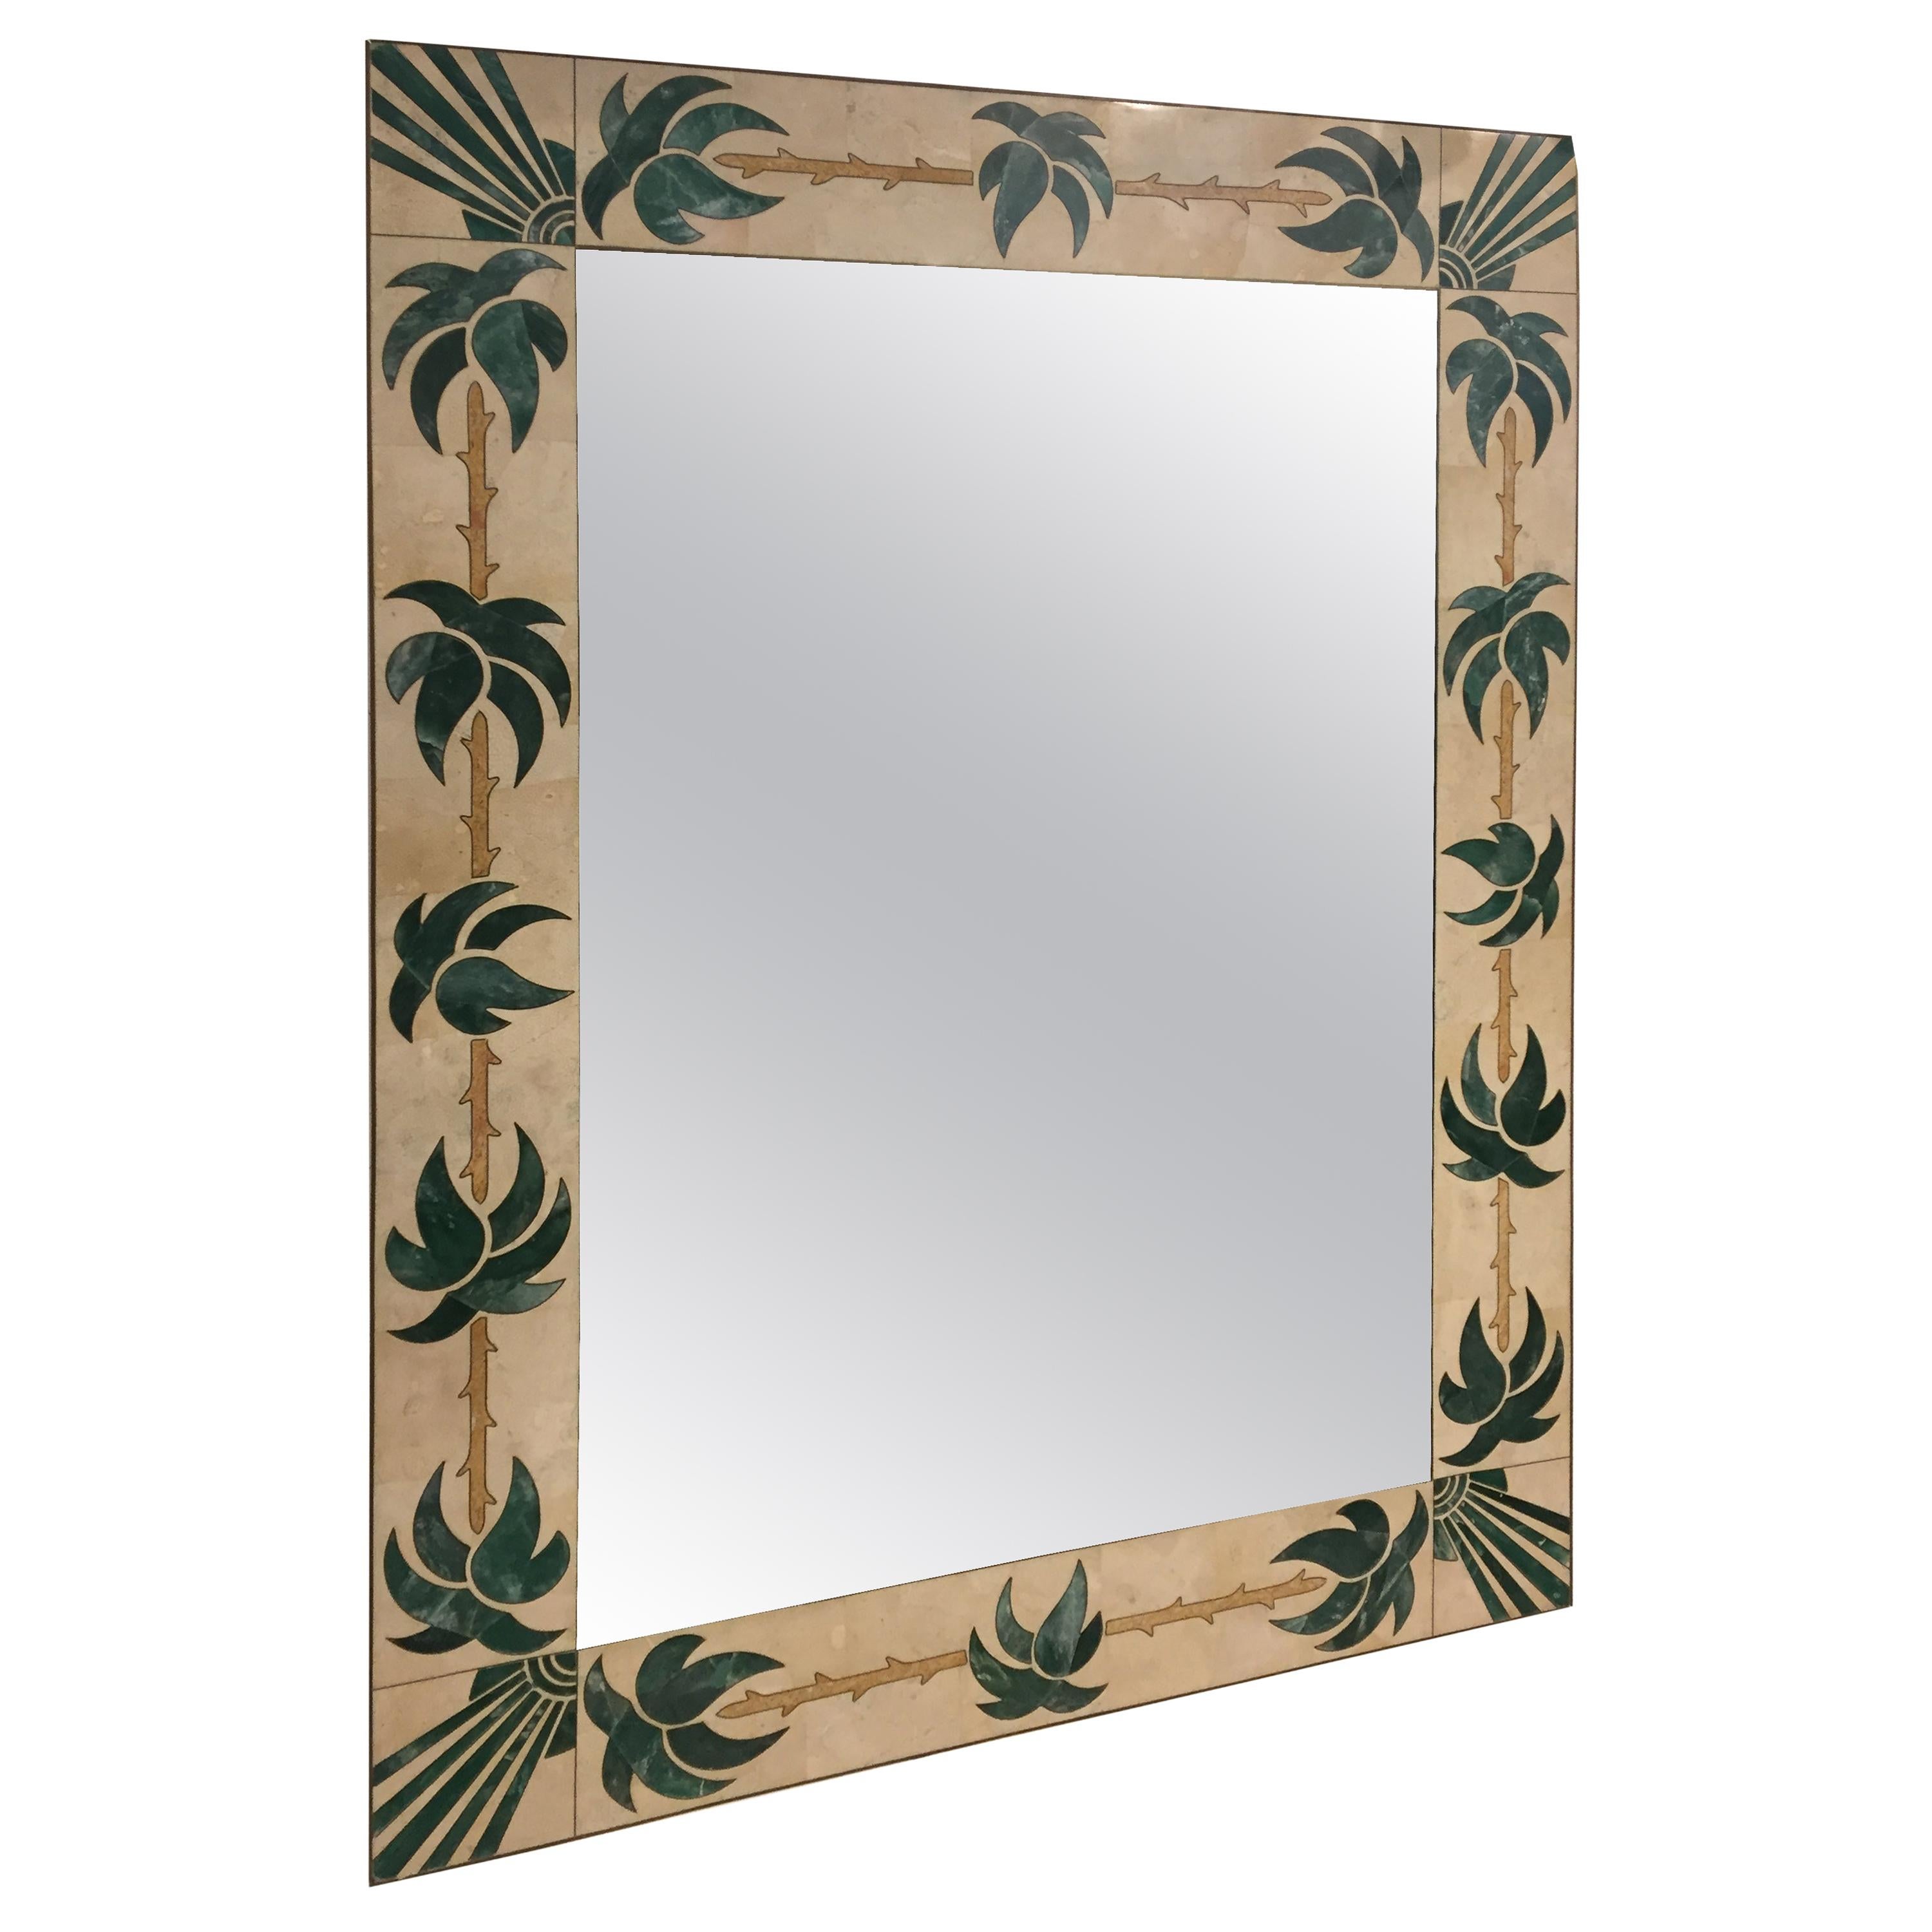 Mexican Modern Inlaid Stone and Brass Mirror